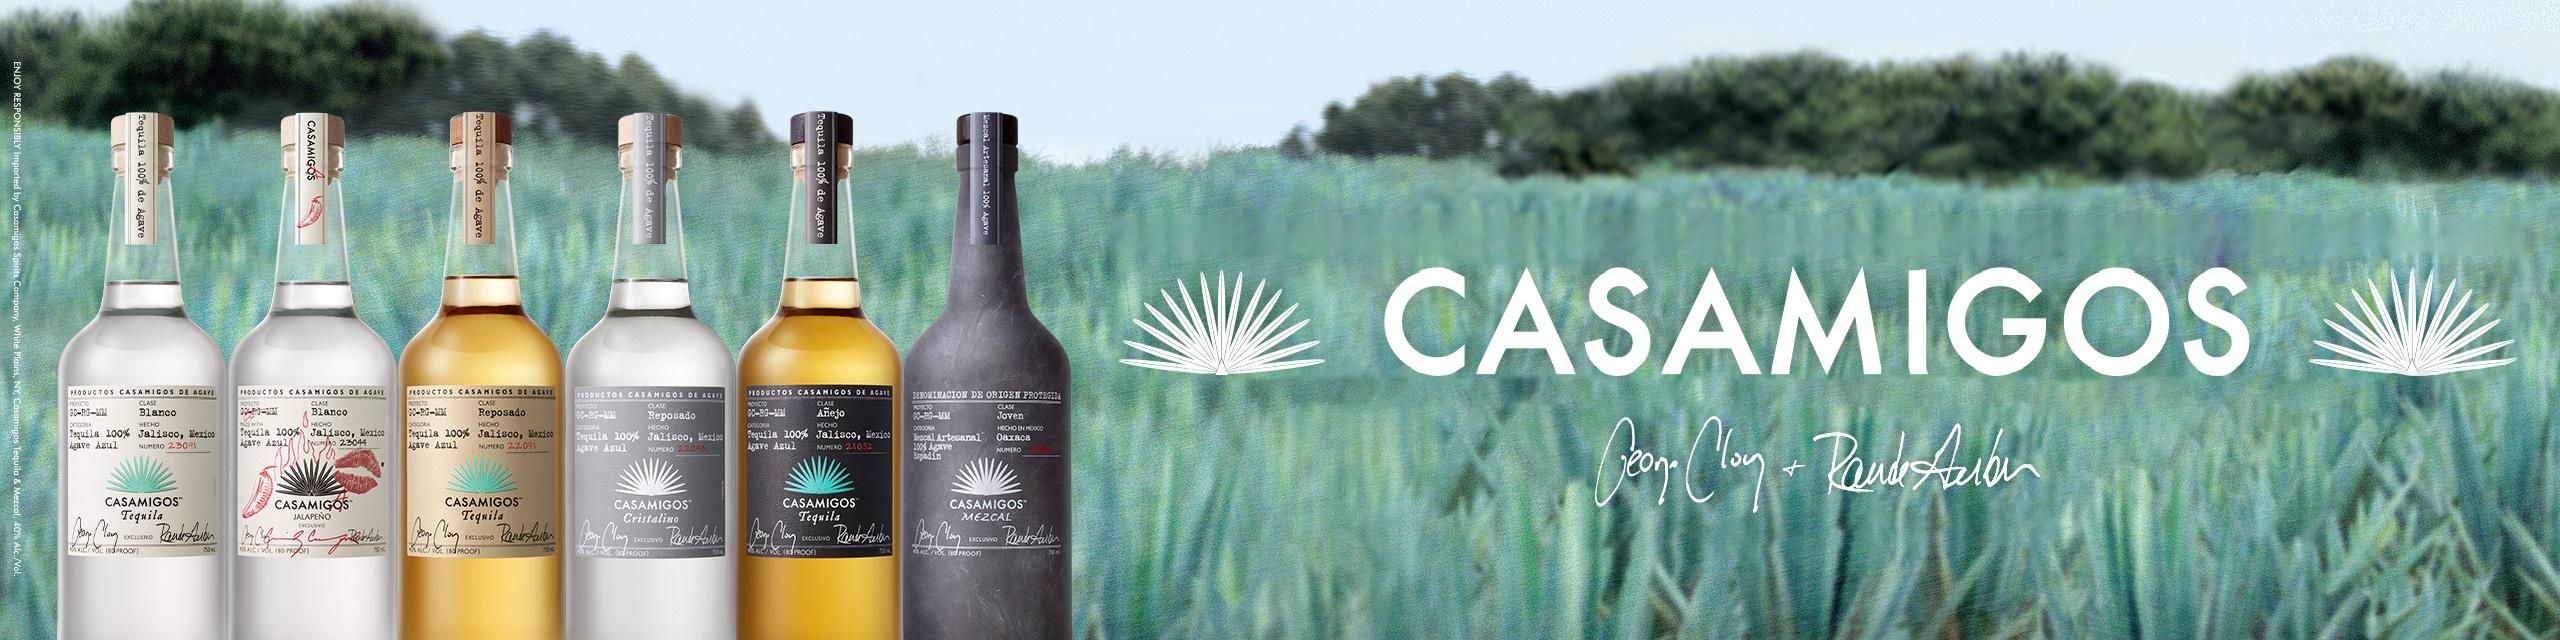 Discover the Casamigos tequila and mezcal collection. Choose from a variety of customer favorites including Casamigos Blanco,  Reposado, Cristalino and Añejo.